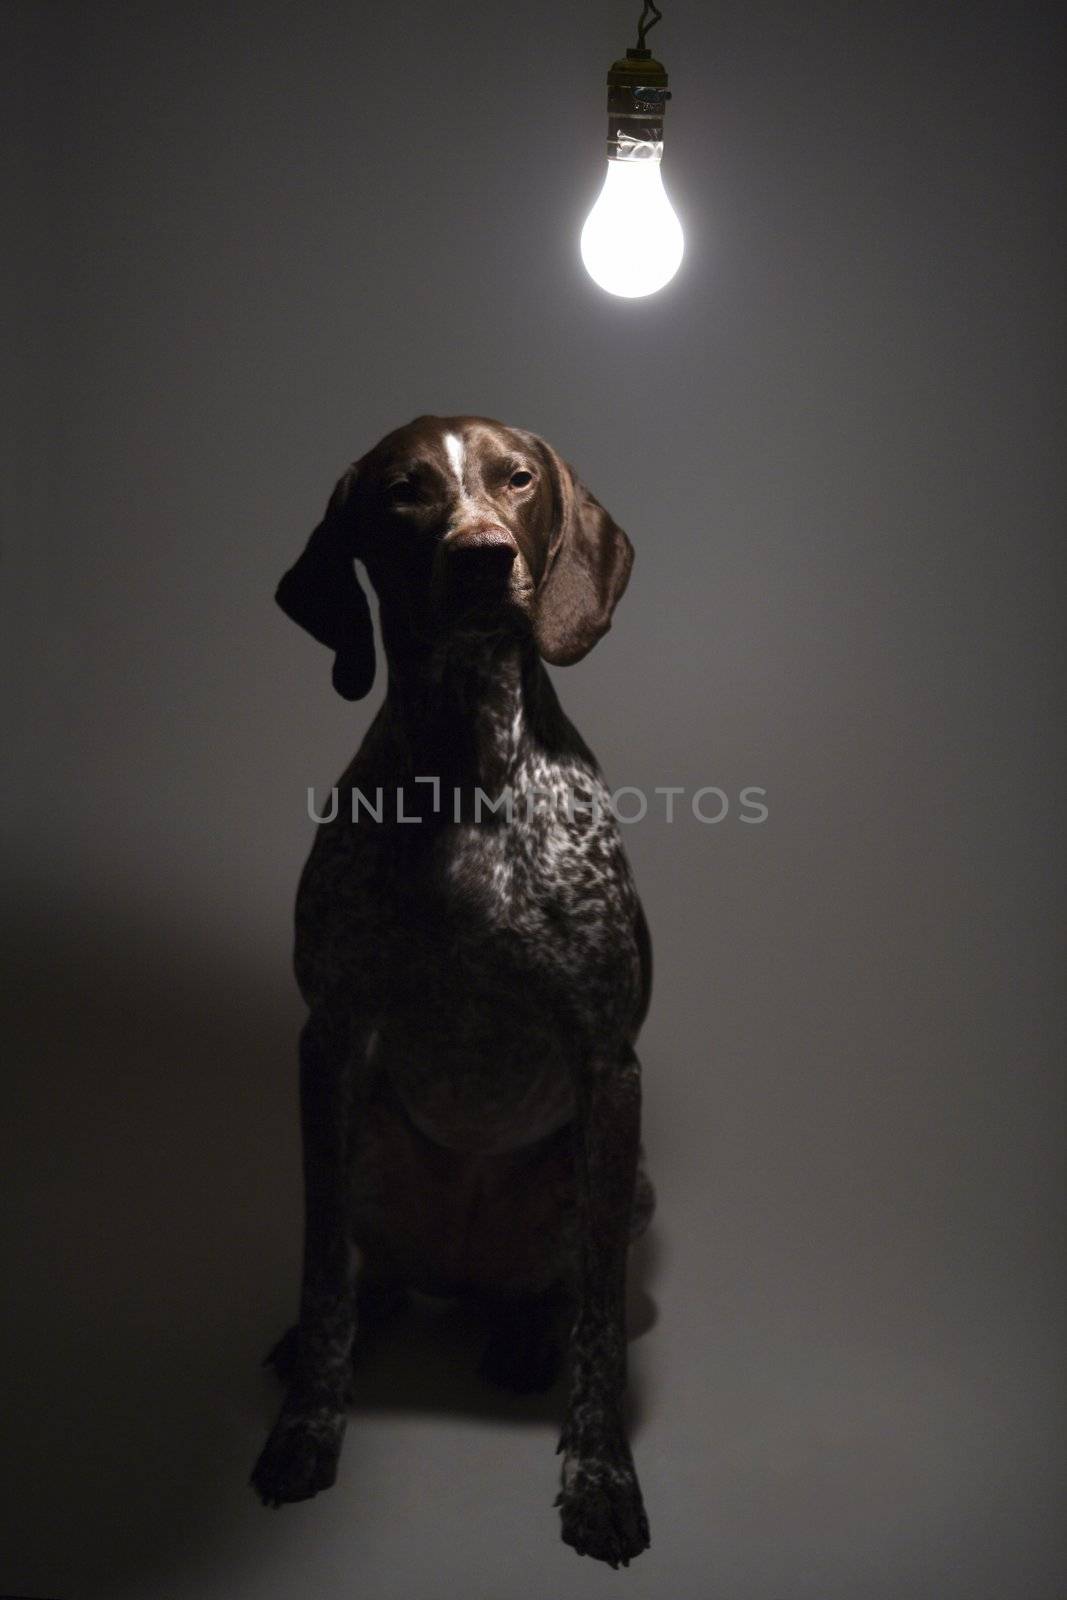 German Shorthaired Pointer with lit lightbulb hanging above.